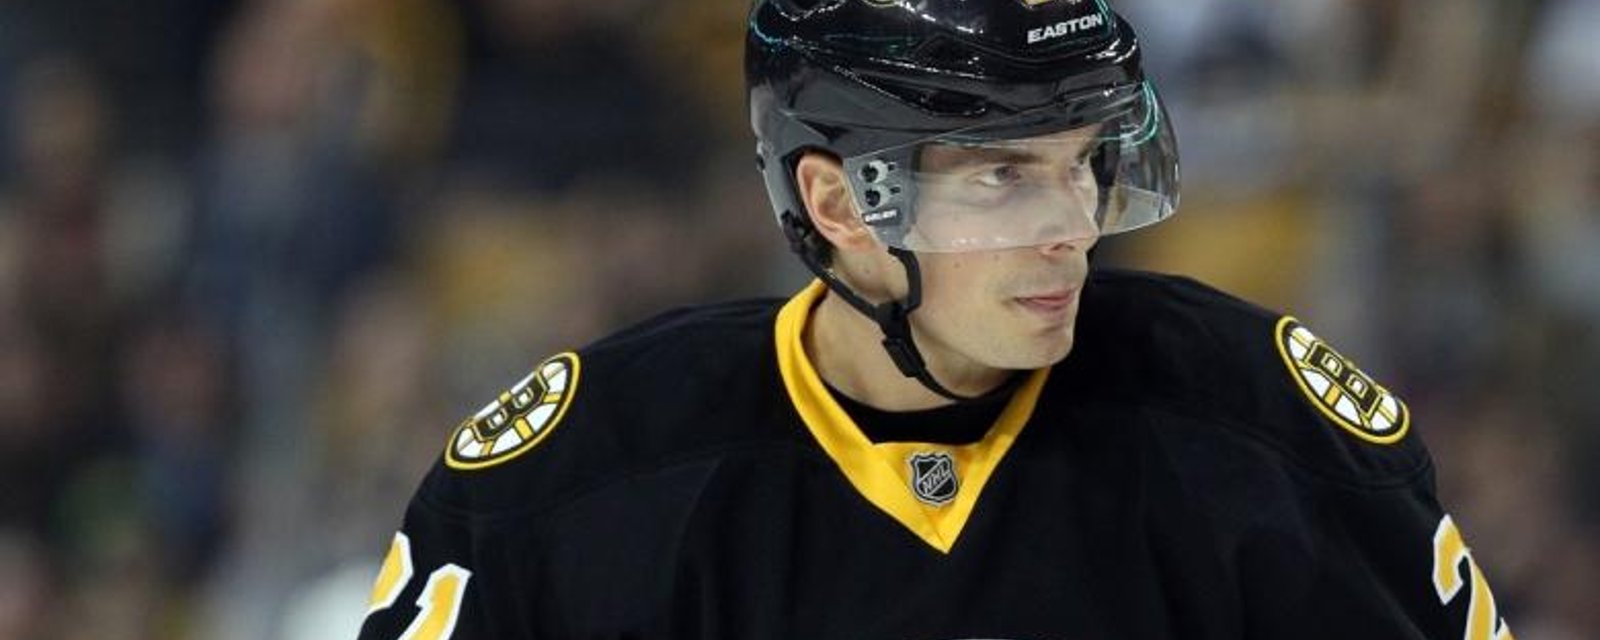 Eriksson's agent comments on negotiations with the Bruins.